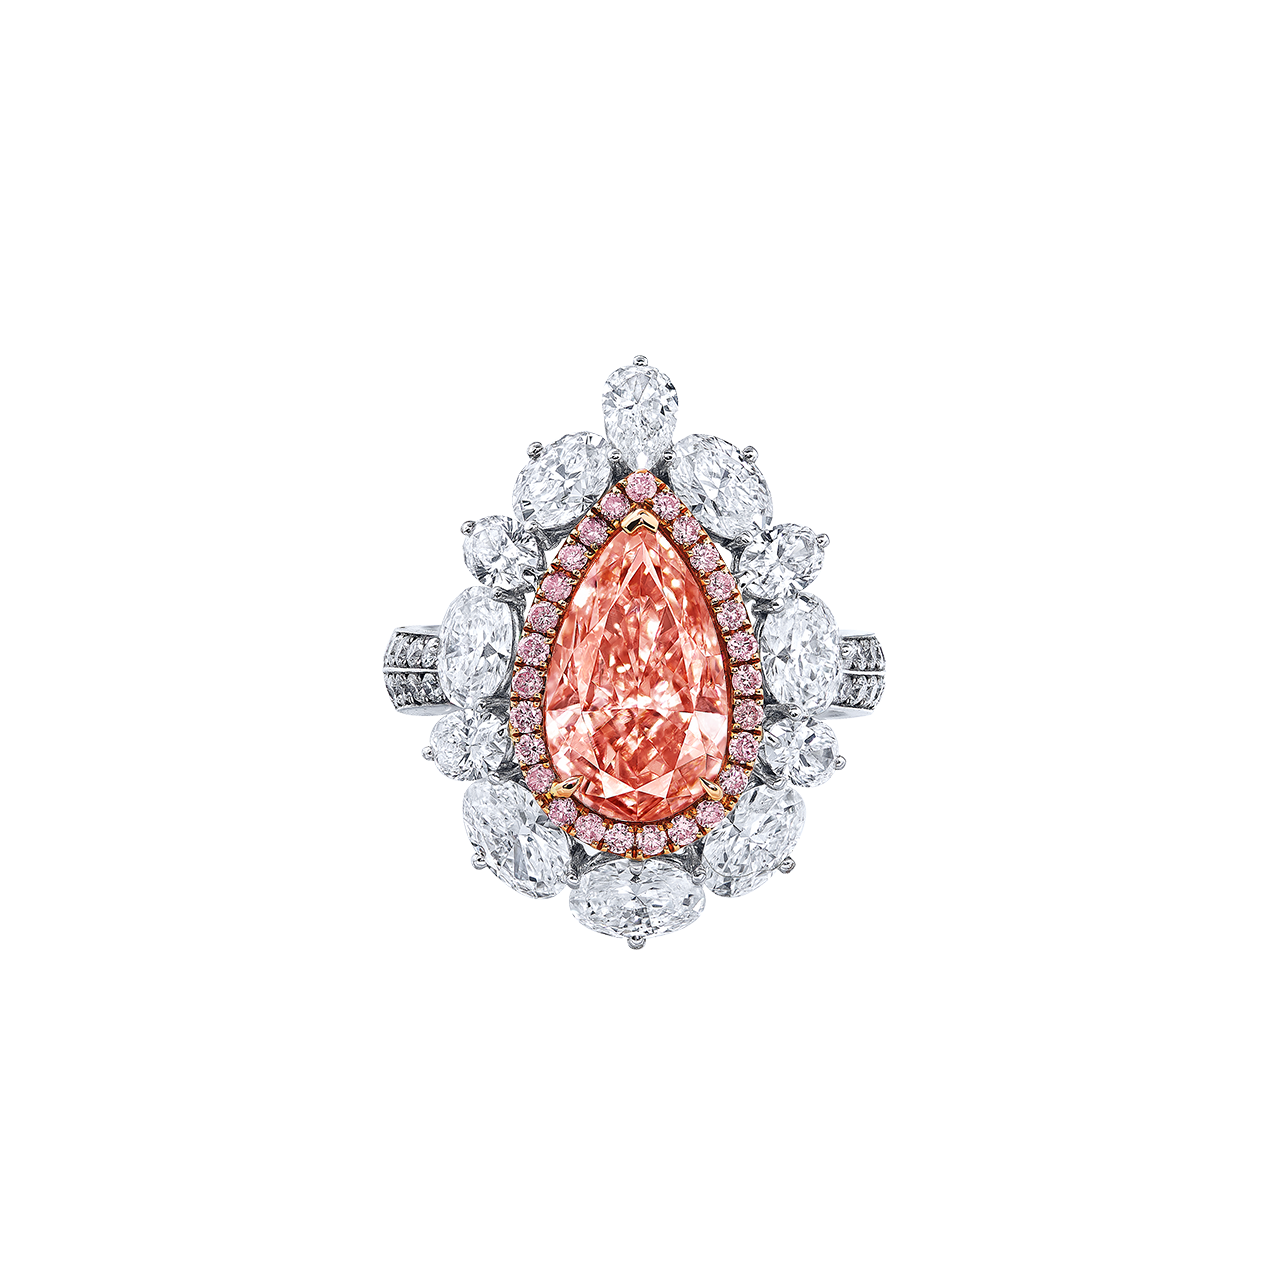 GIA 3.05克拉 橘粉彩鑽鑽戒
AN ATTRACTIVE FANCY ORANGY PINK 
DIAMOND AND DIAMOND RING